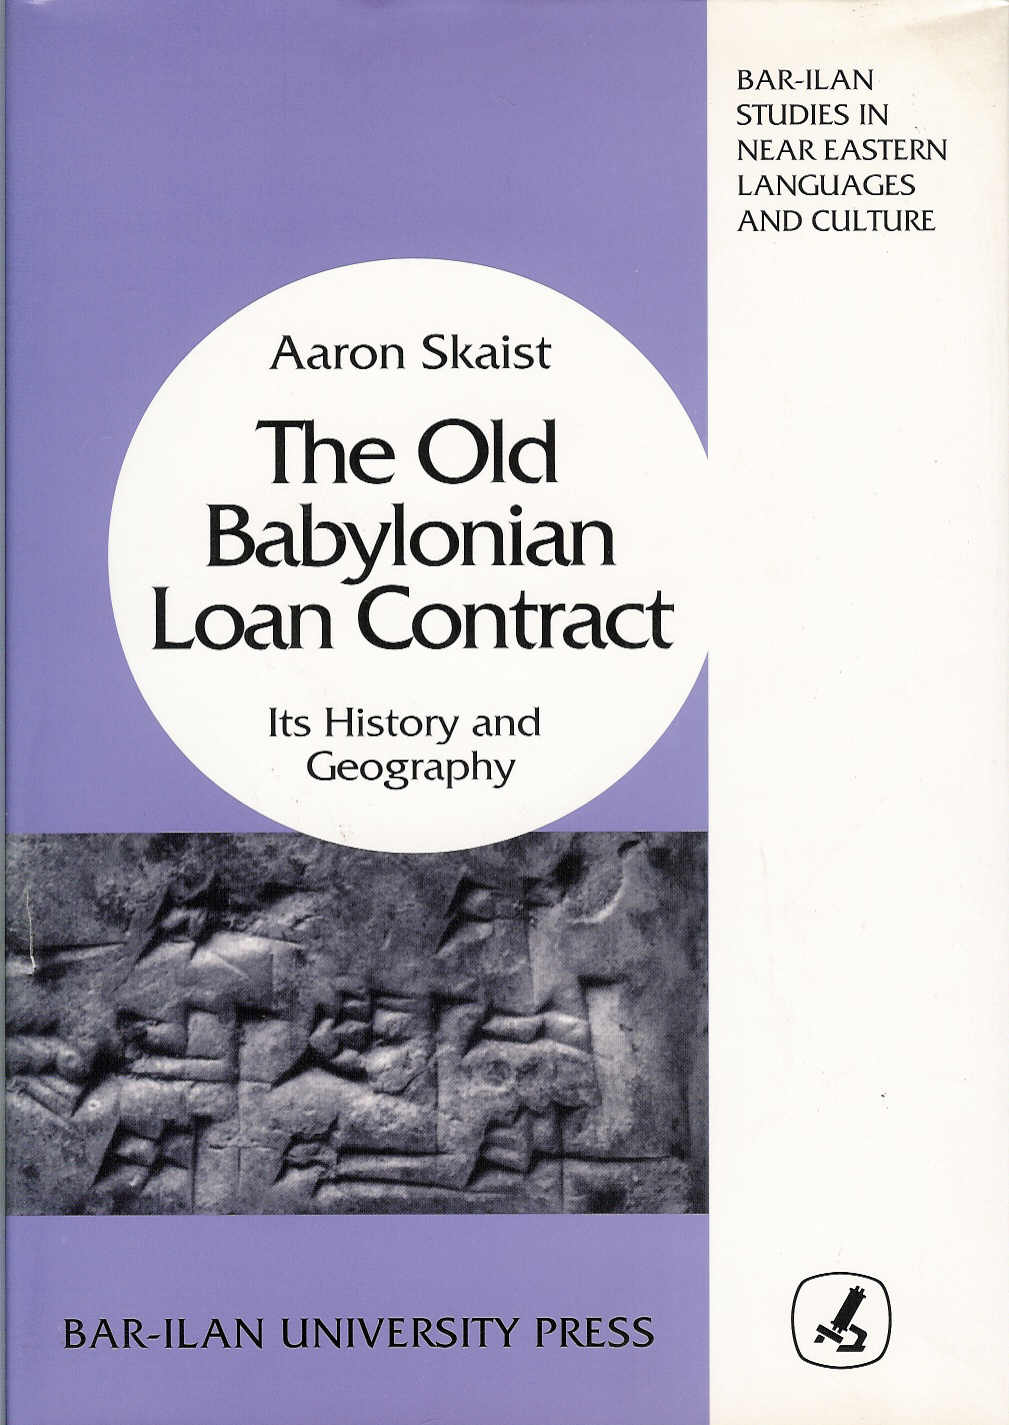 The Old Babylonian Loan Contract